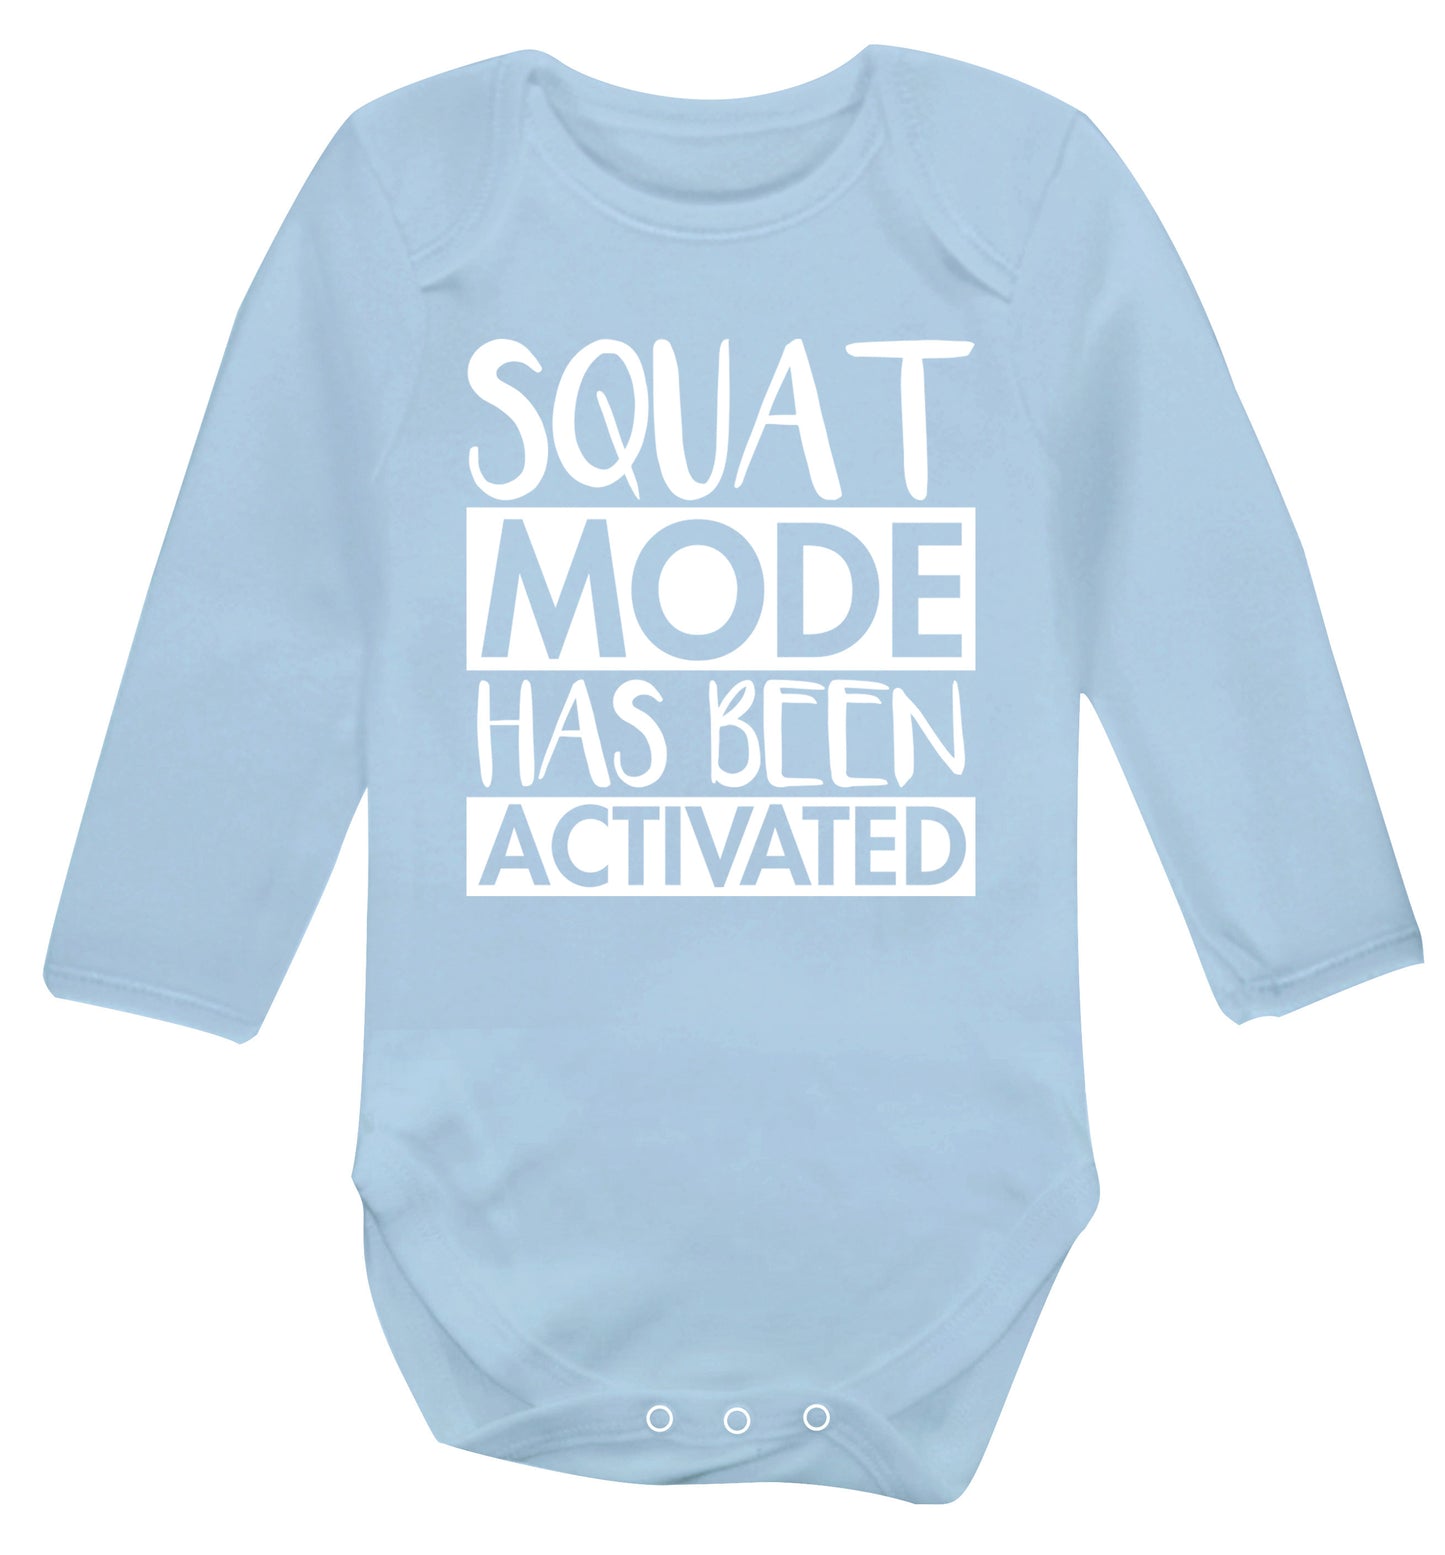 Squat mode activated Baby Vest long sleeved pale blue 6-12 months